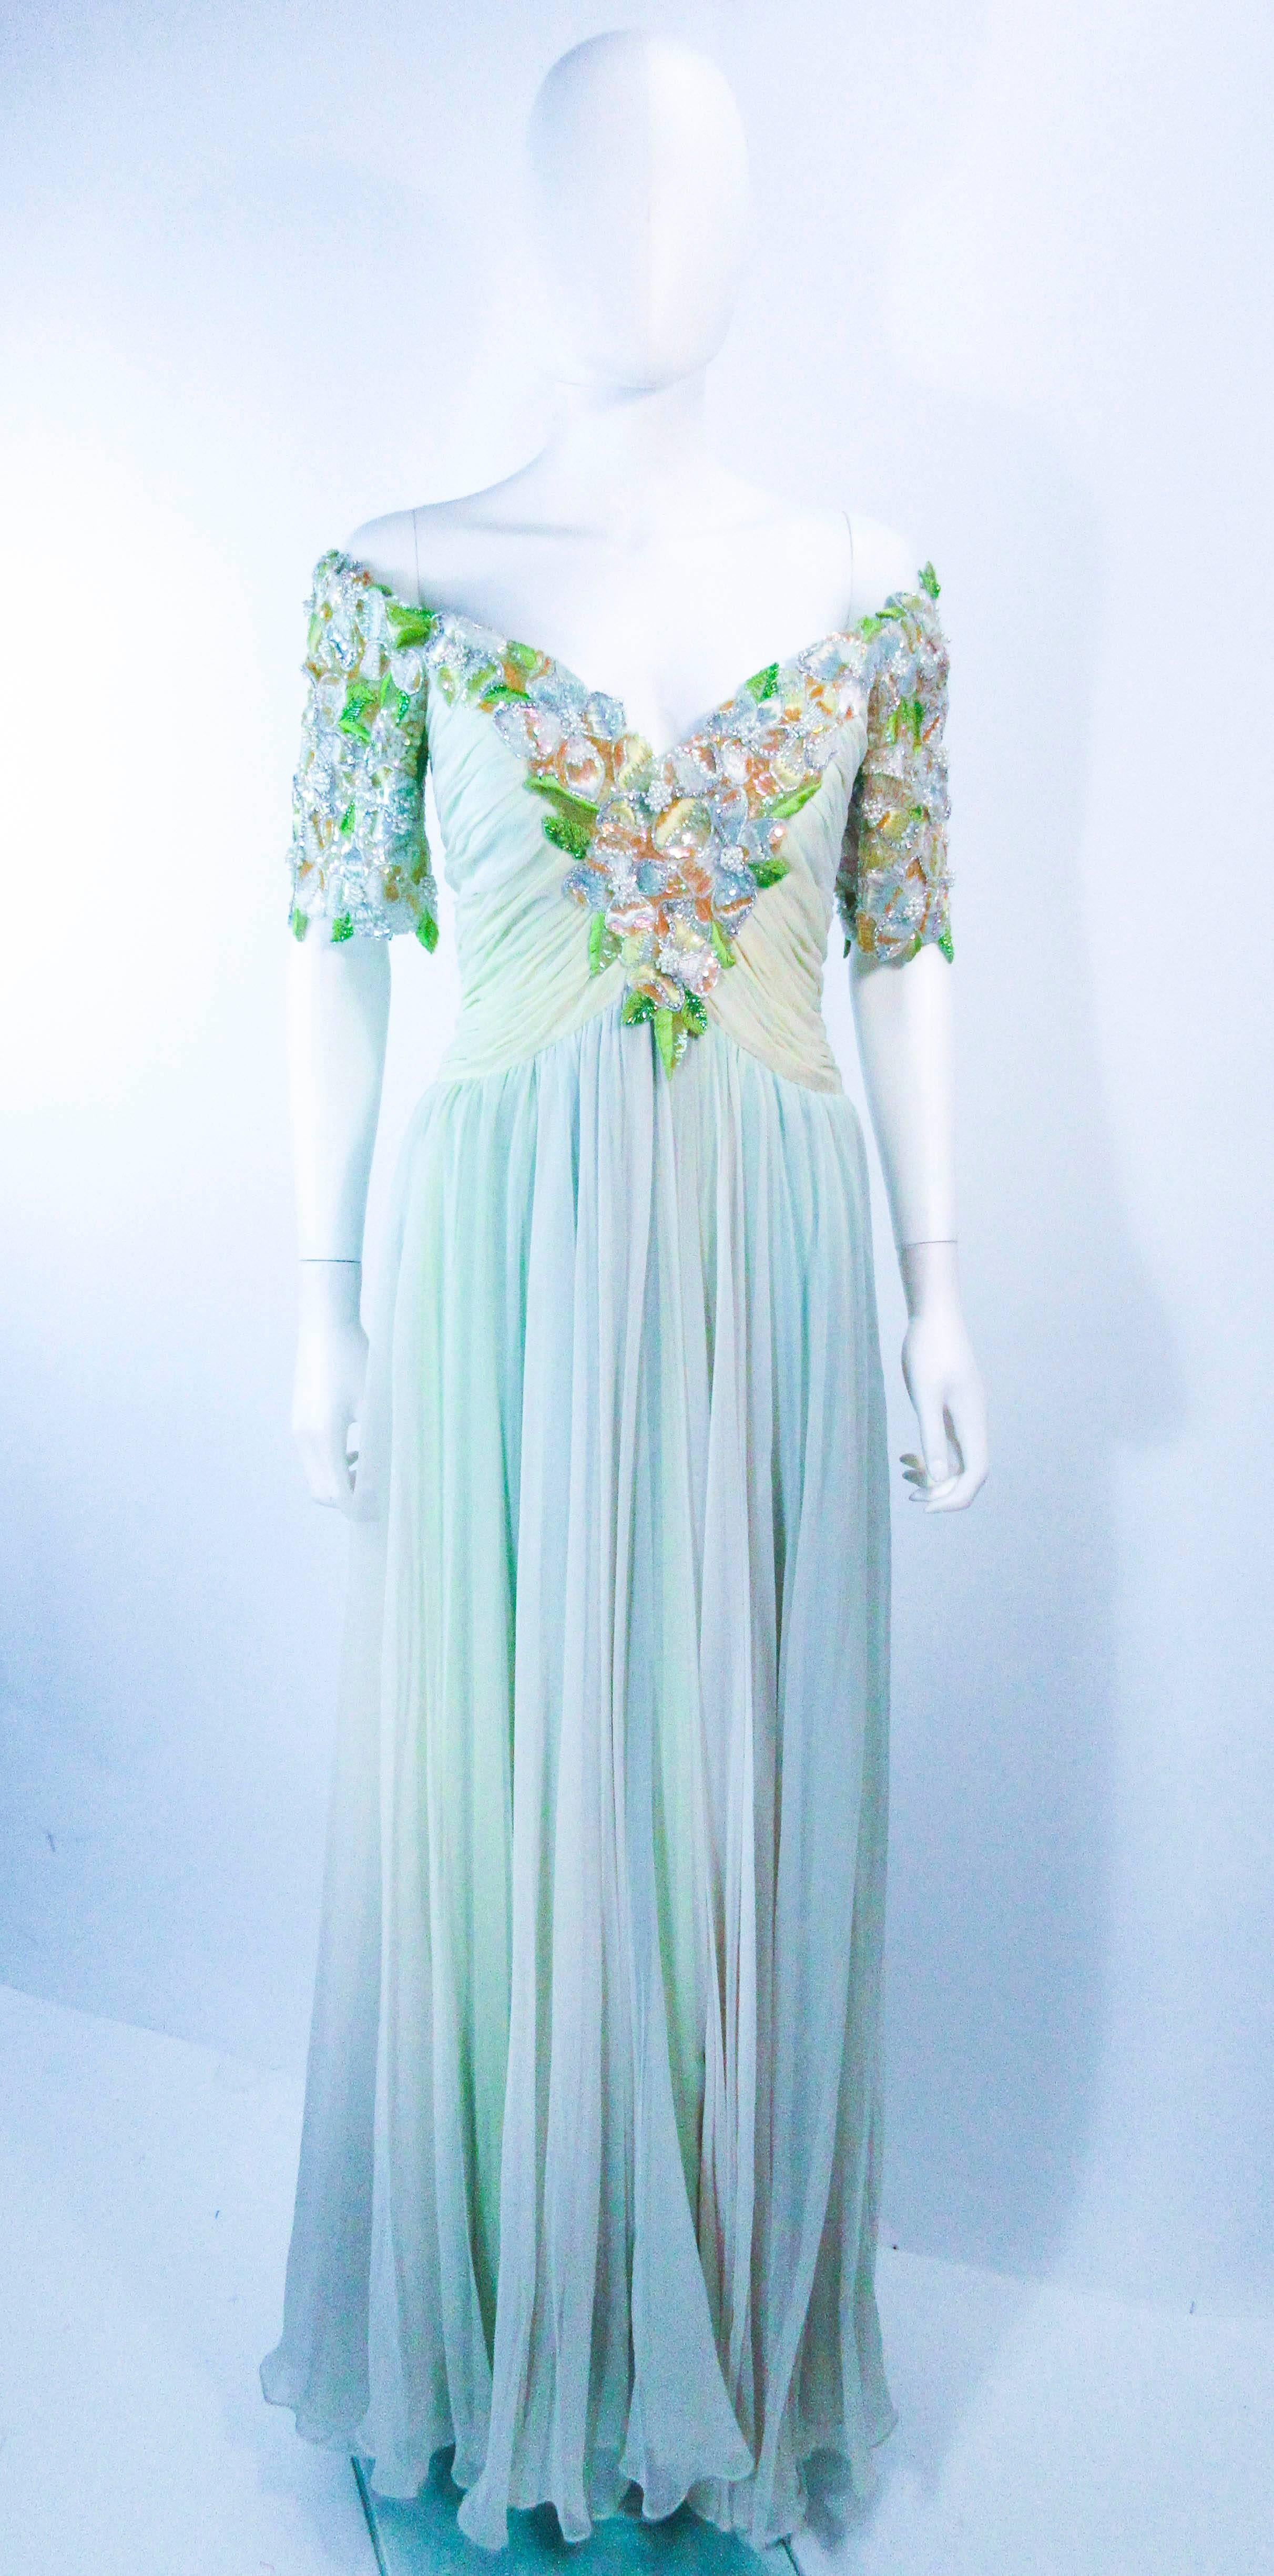 This vintage Bob Mackie gown is composed of a light green mint hue silk chiffon. The upper bodice features an embellished center front and short sleeve, with a floral pattern. There is a zipper closure with structured interior. In 